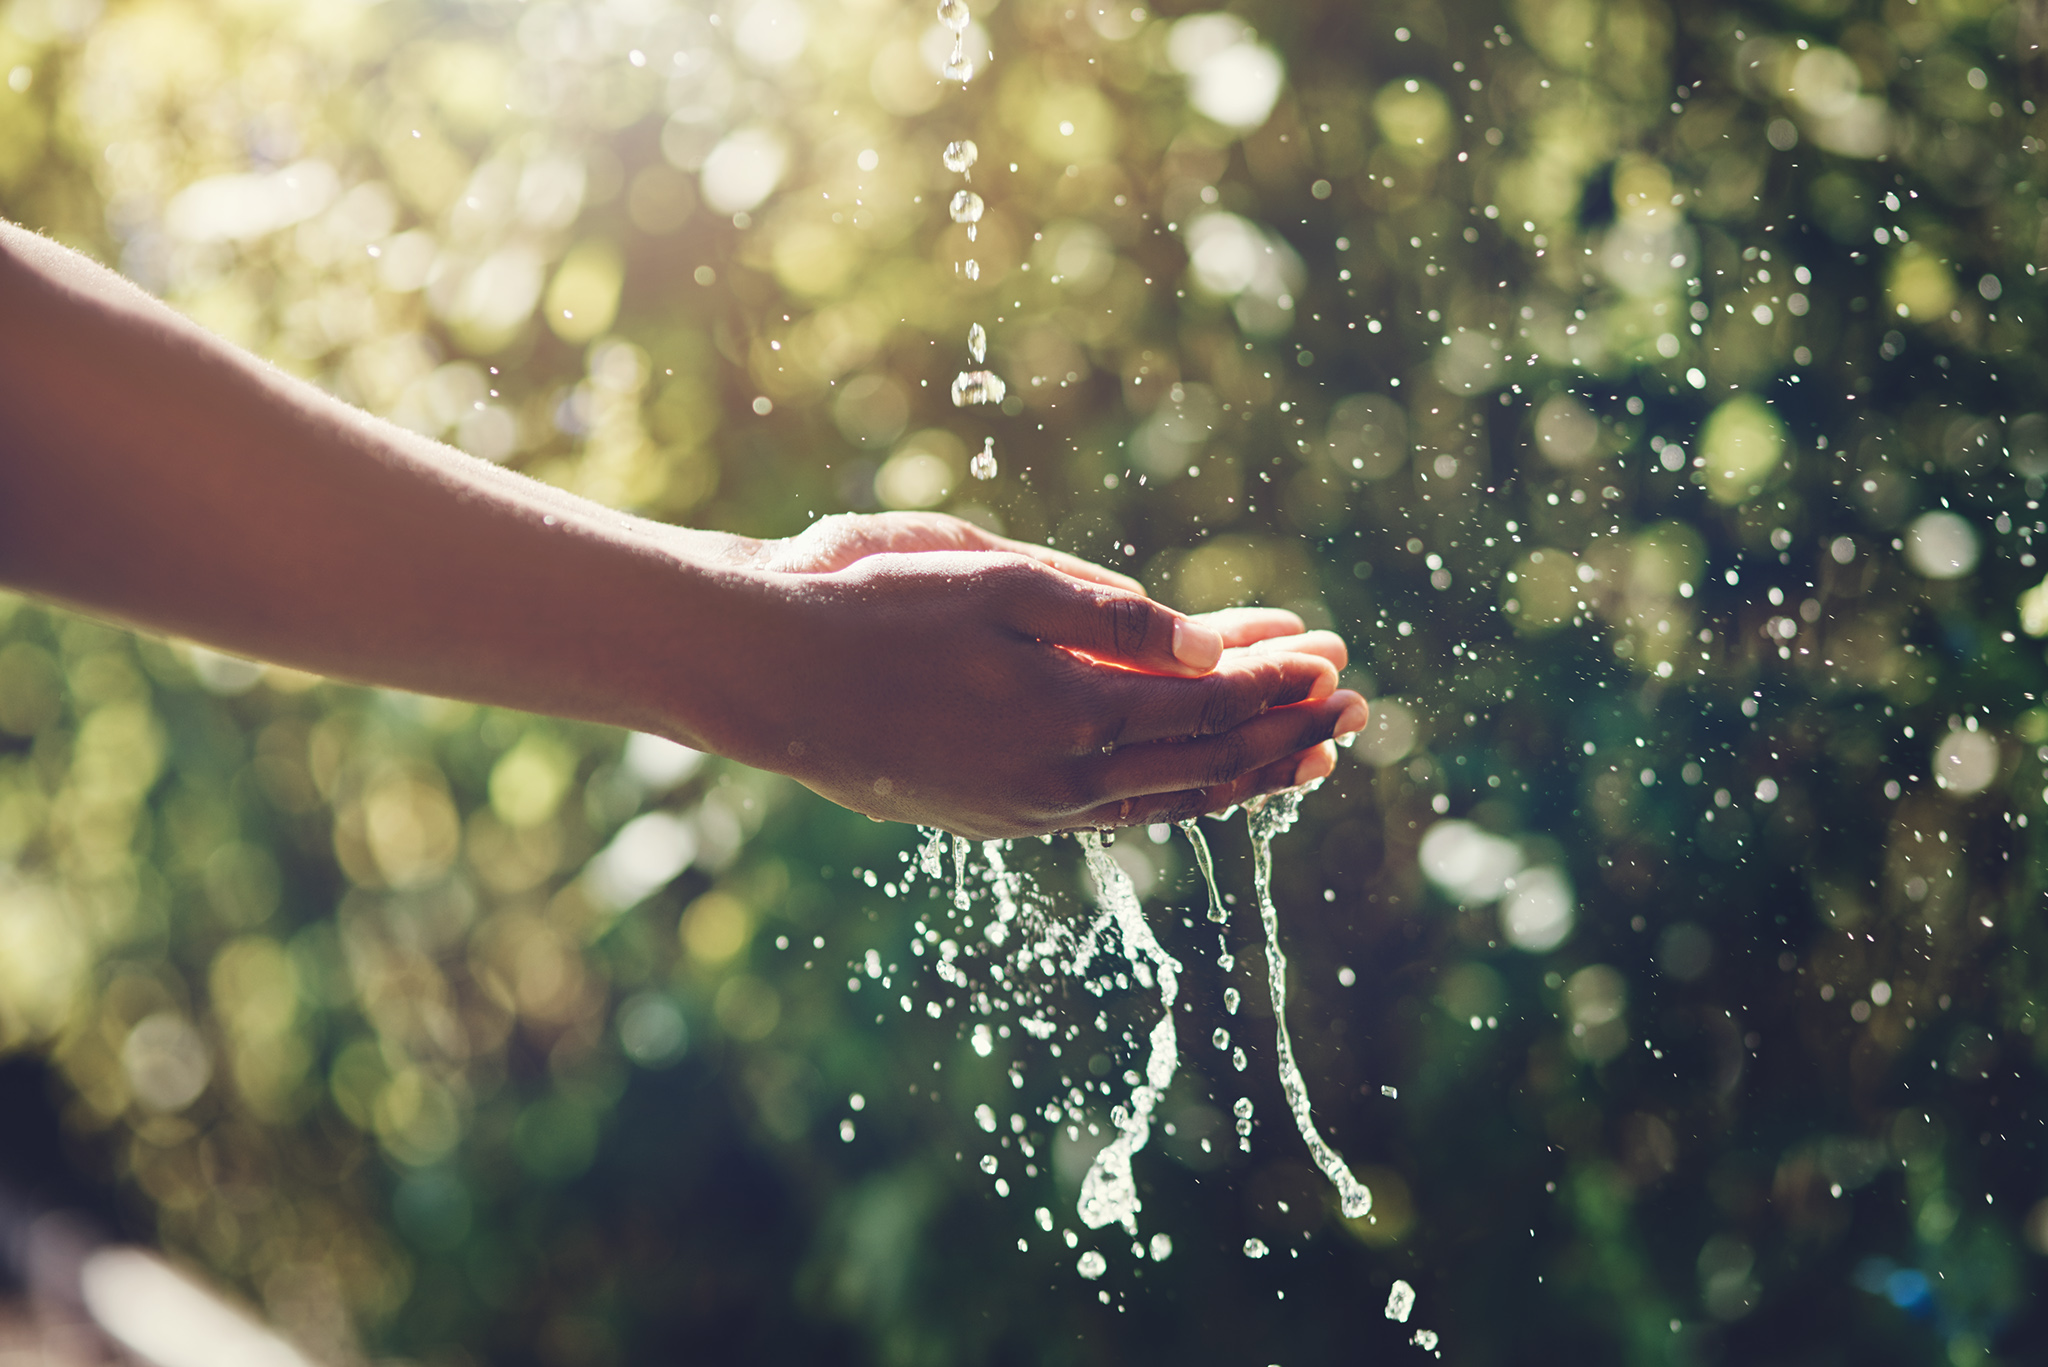 Closeup shot of a man holding his hands under a stream of water outdoors